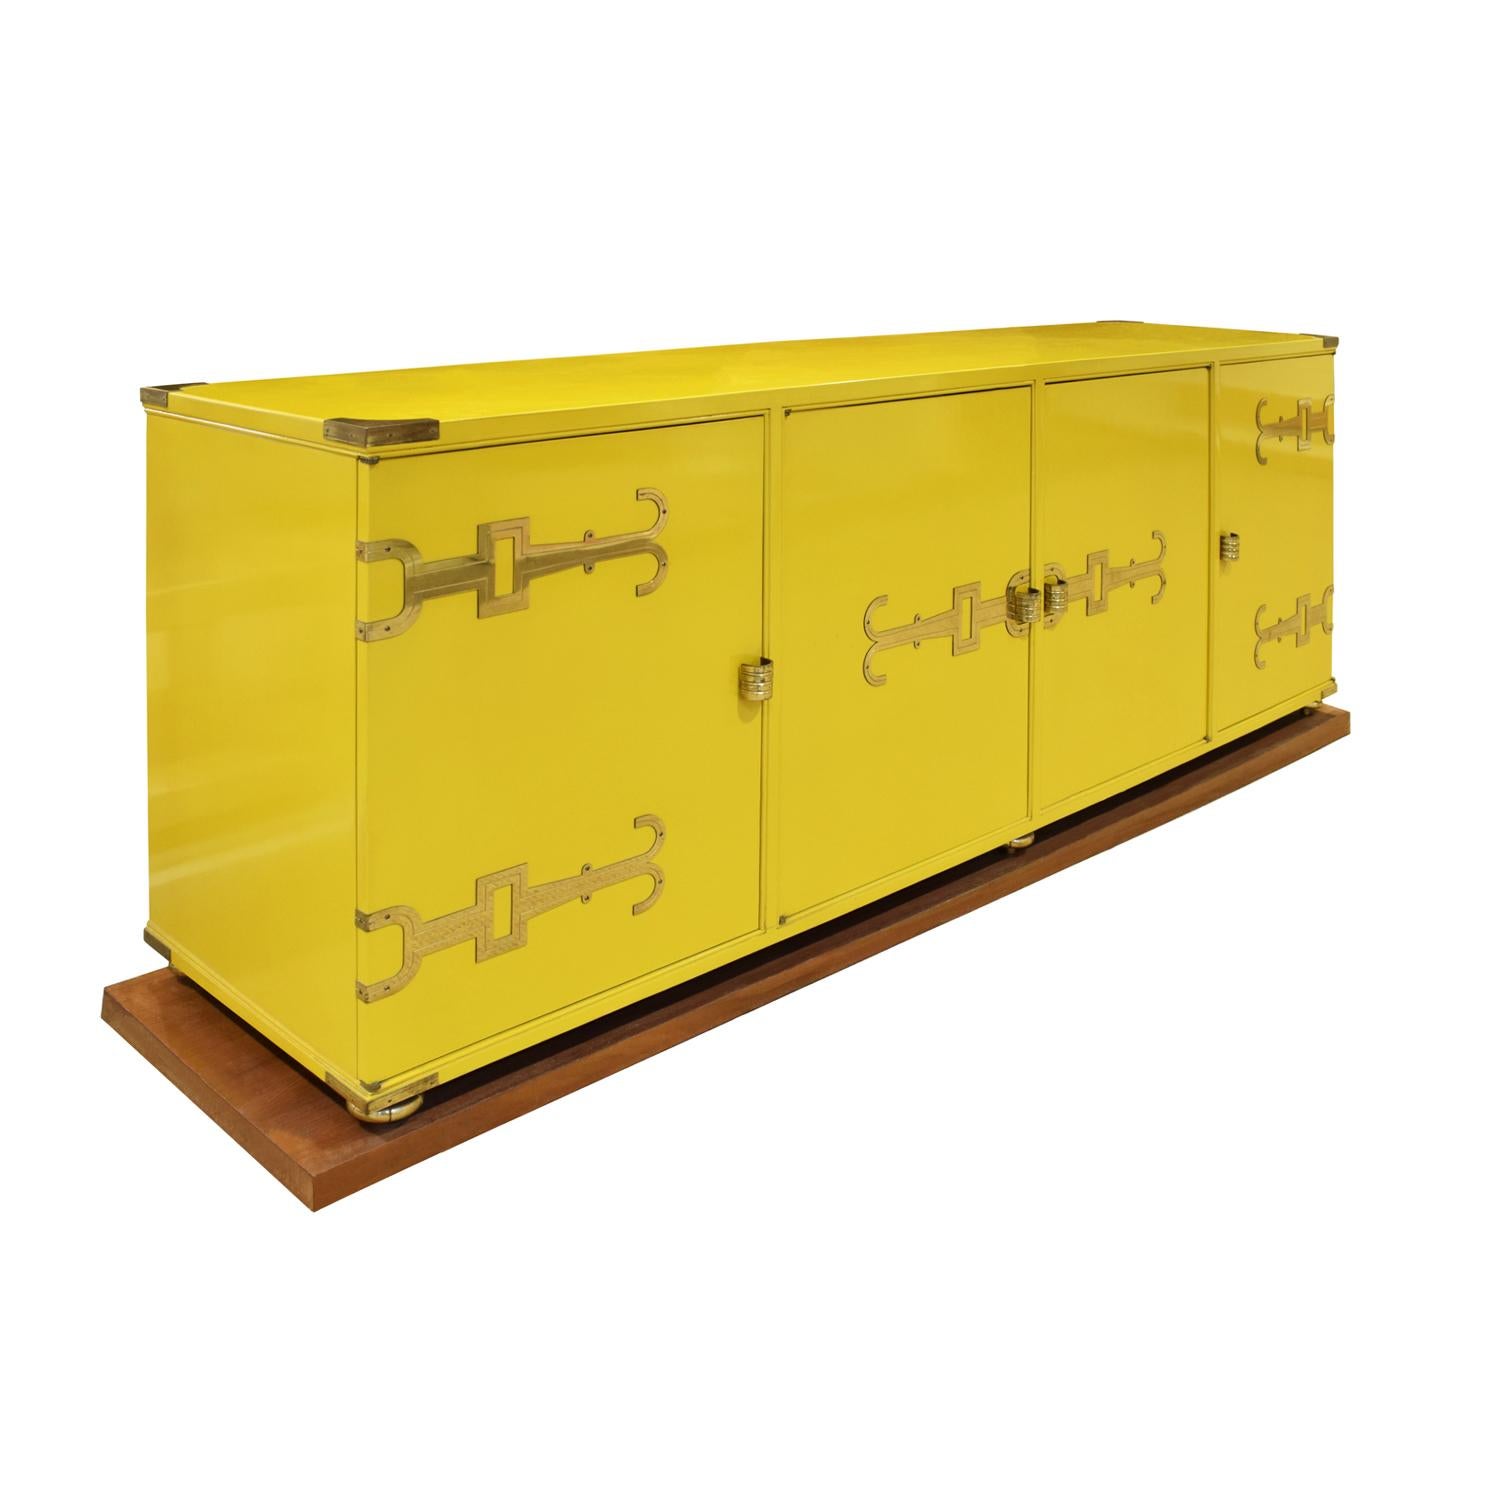 Exceptional credenza model #140 in yellow lacquer with iconic etched brass hardware, corner accents and sculptural ball feet which sit on a plinth base by Tommi Parzinger for Parzinger Originals, American 1950s. Since the lacquer is original and has